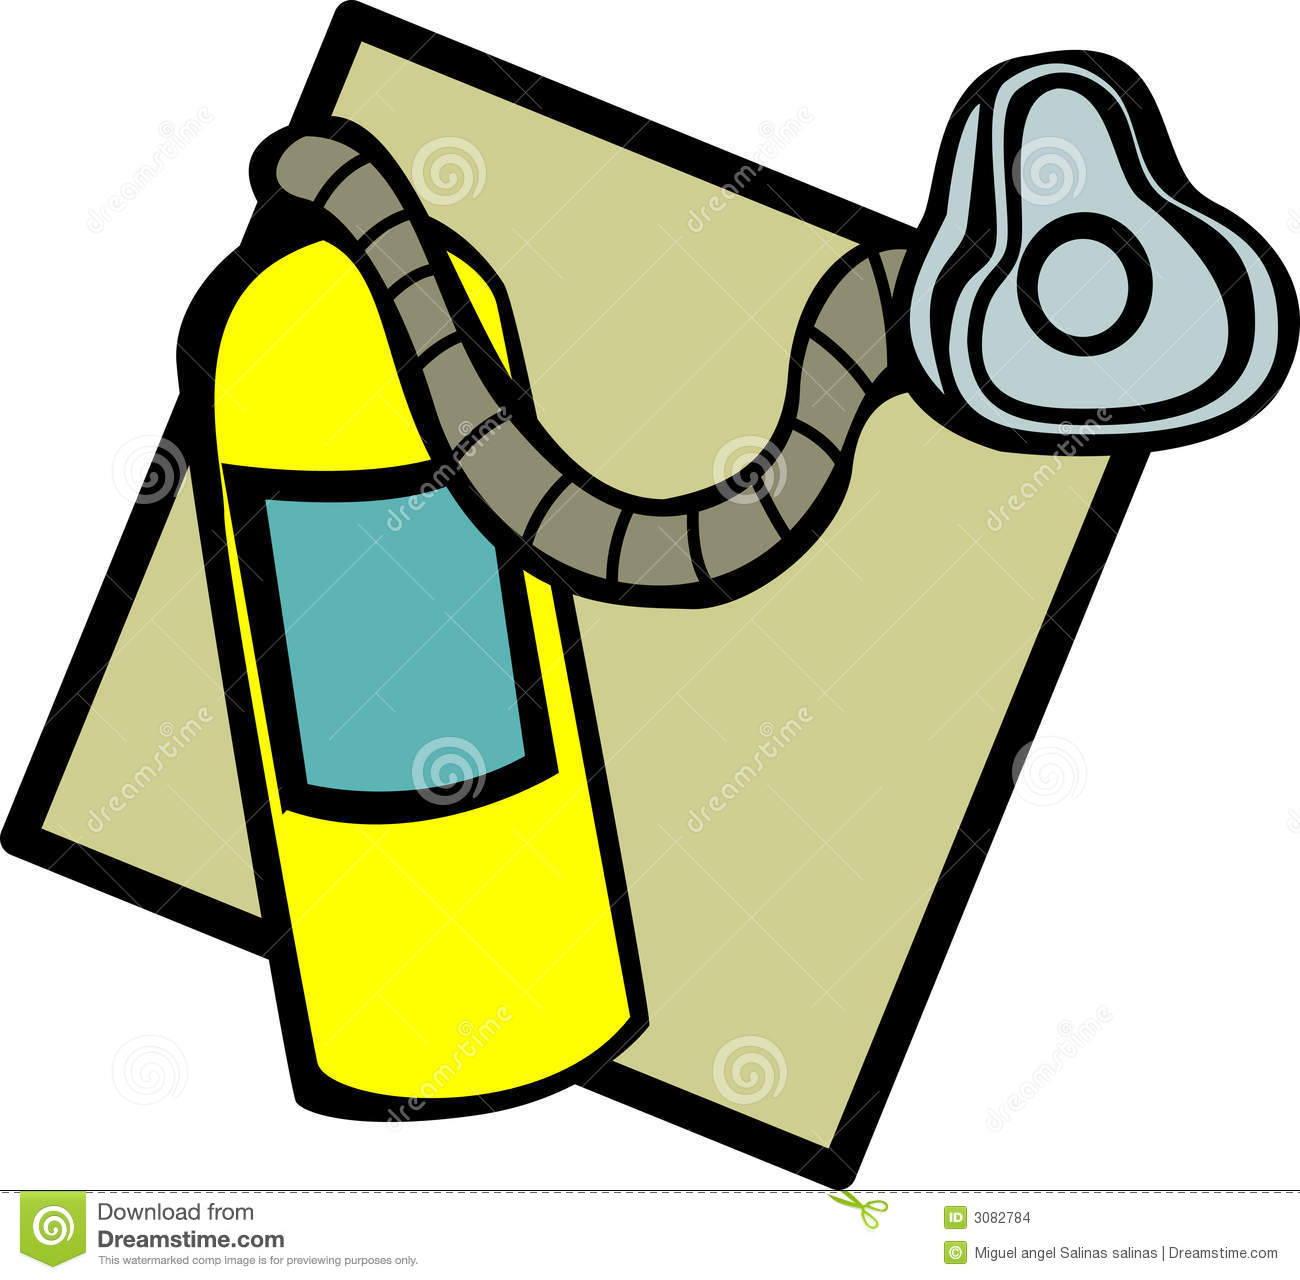 Oxygen Tank And Mask Vector Illustration Stock Images   Image  3082784